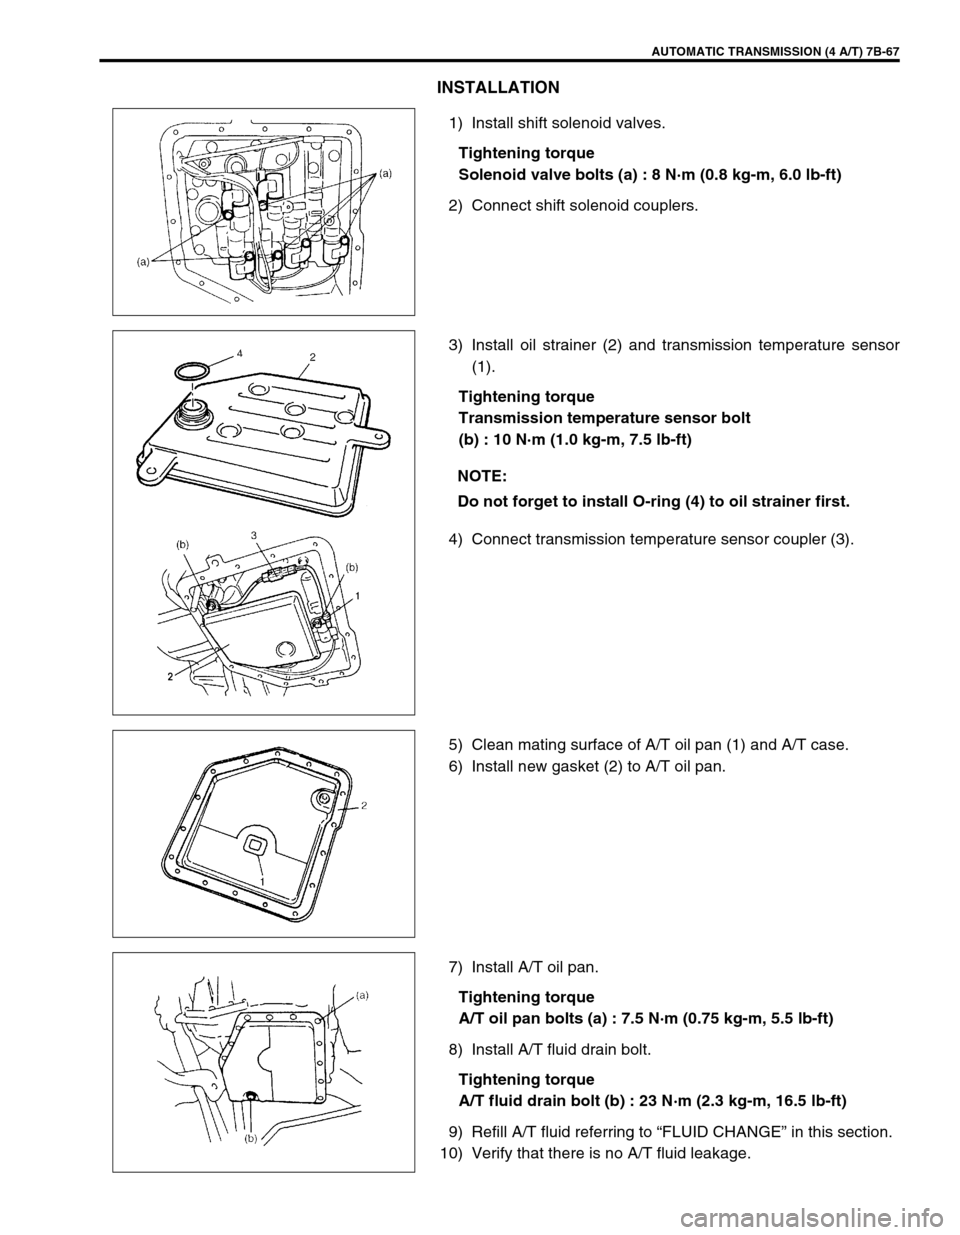 SUZUKI SWIFT 2000 1.G Transmission Service Workshop Manual AUTOMATIC TRANSMISSION (4 A/T) 7B-67
INSTALLATION
1) Install shift solenoid valves.
Tightening torque
Solenoid valve bolts (a) : 8 N·m (0.8 kg-m, 6.0 lb-ft)
2) Connect shift solenoid couplers.
3) Ins